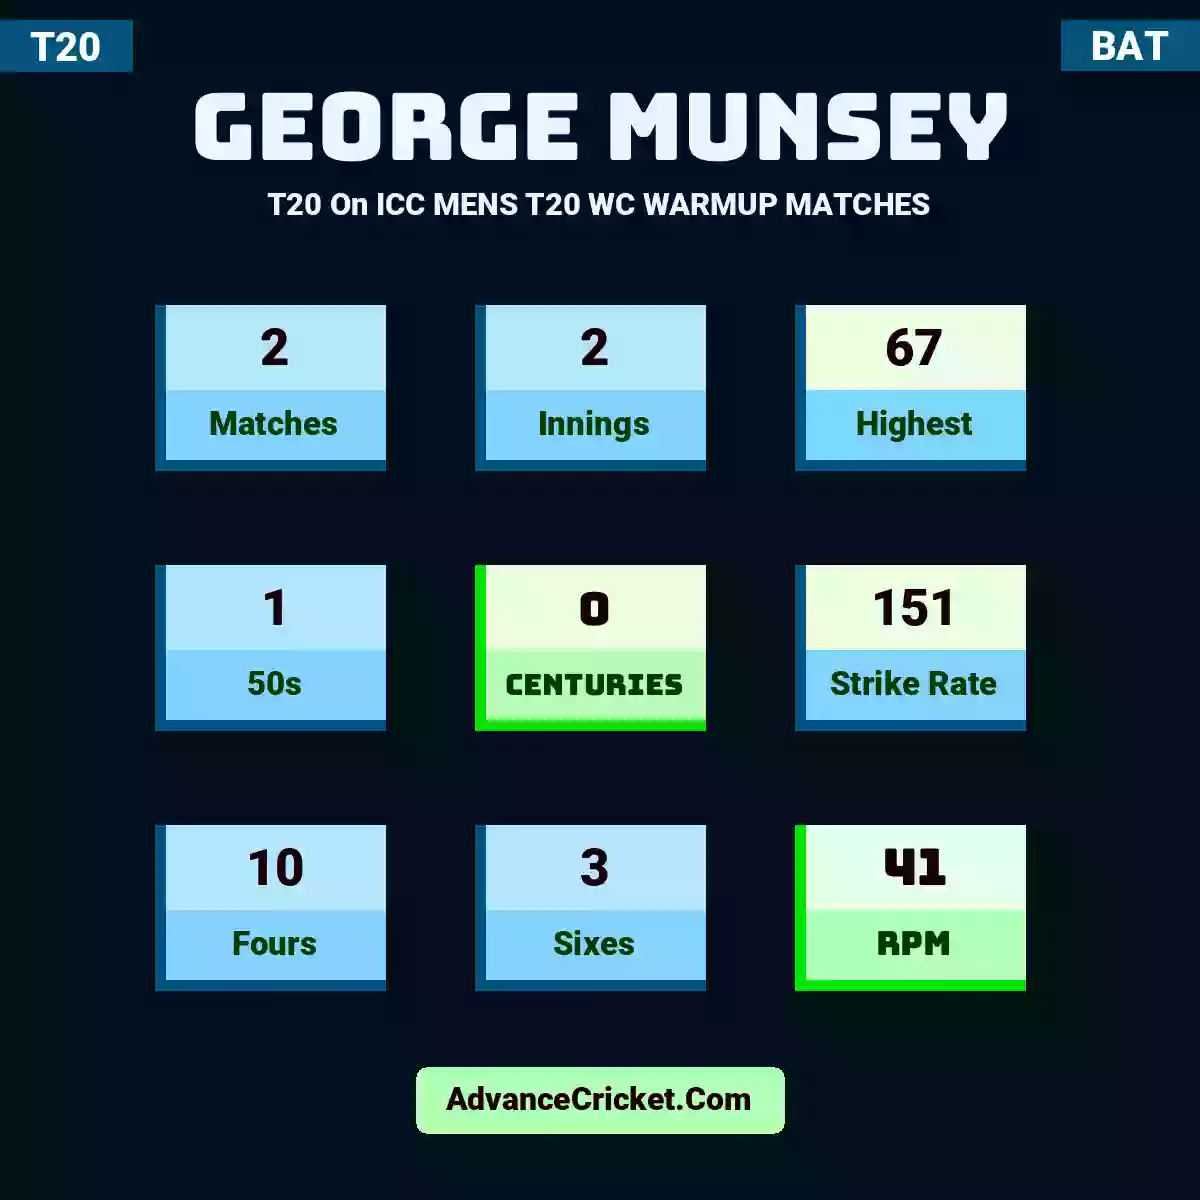 George Munsey T20  On ICC MENS T20 WC WARMUP MATCHES, George Munsey played 2 matches, scored 67 runs as highest, 1 half-centuries, and 0 centuries, with a strike rate of 151. G.Munsey hit 10 fours and 3 sixes, with an RPM of 41.